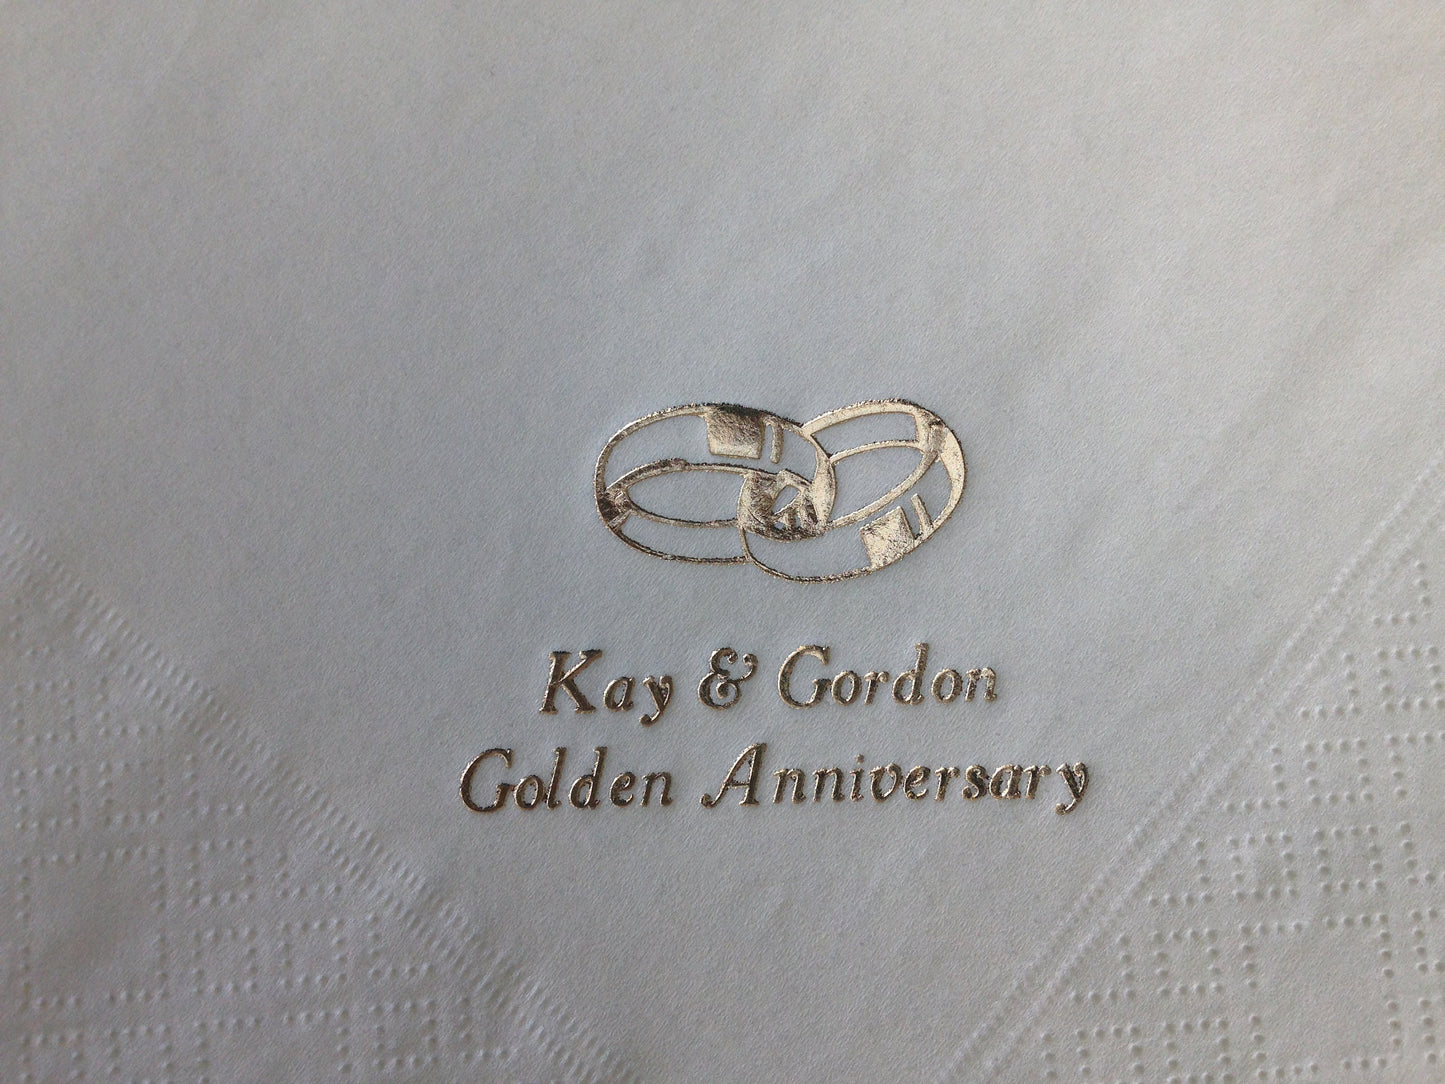 50 Personalised Napkins / Serviettes Quality 3ply Wedding, Birthday, Anniversary, All Occasions